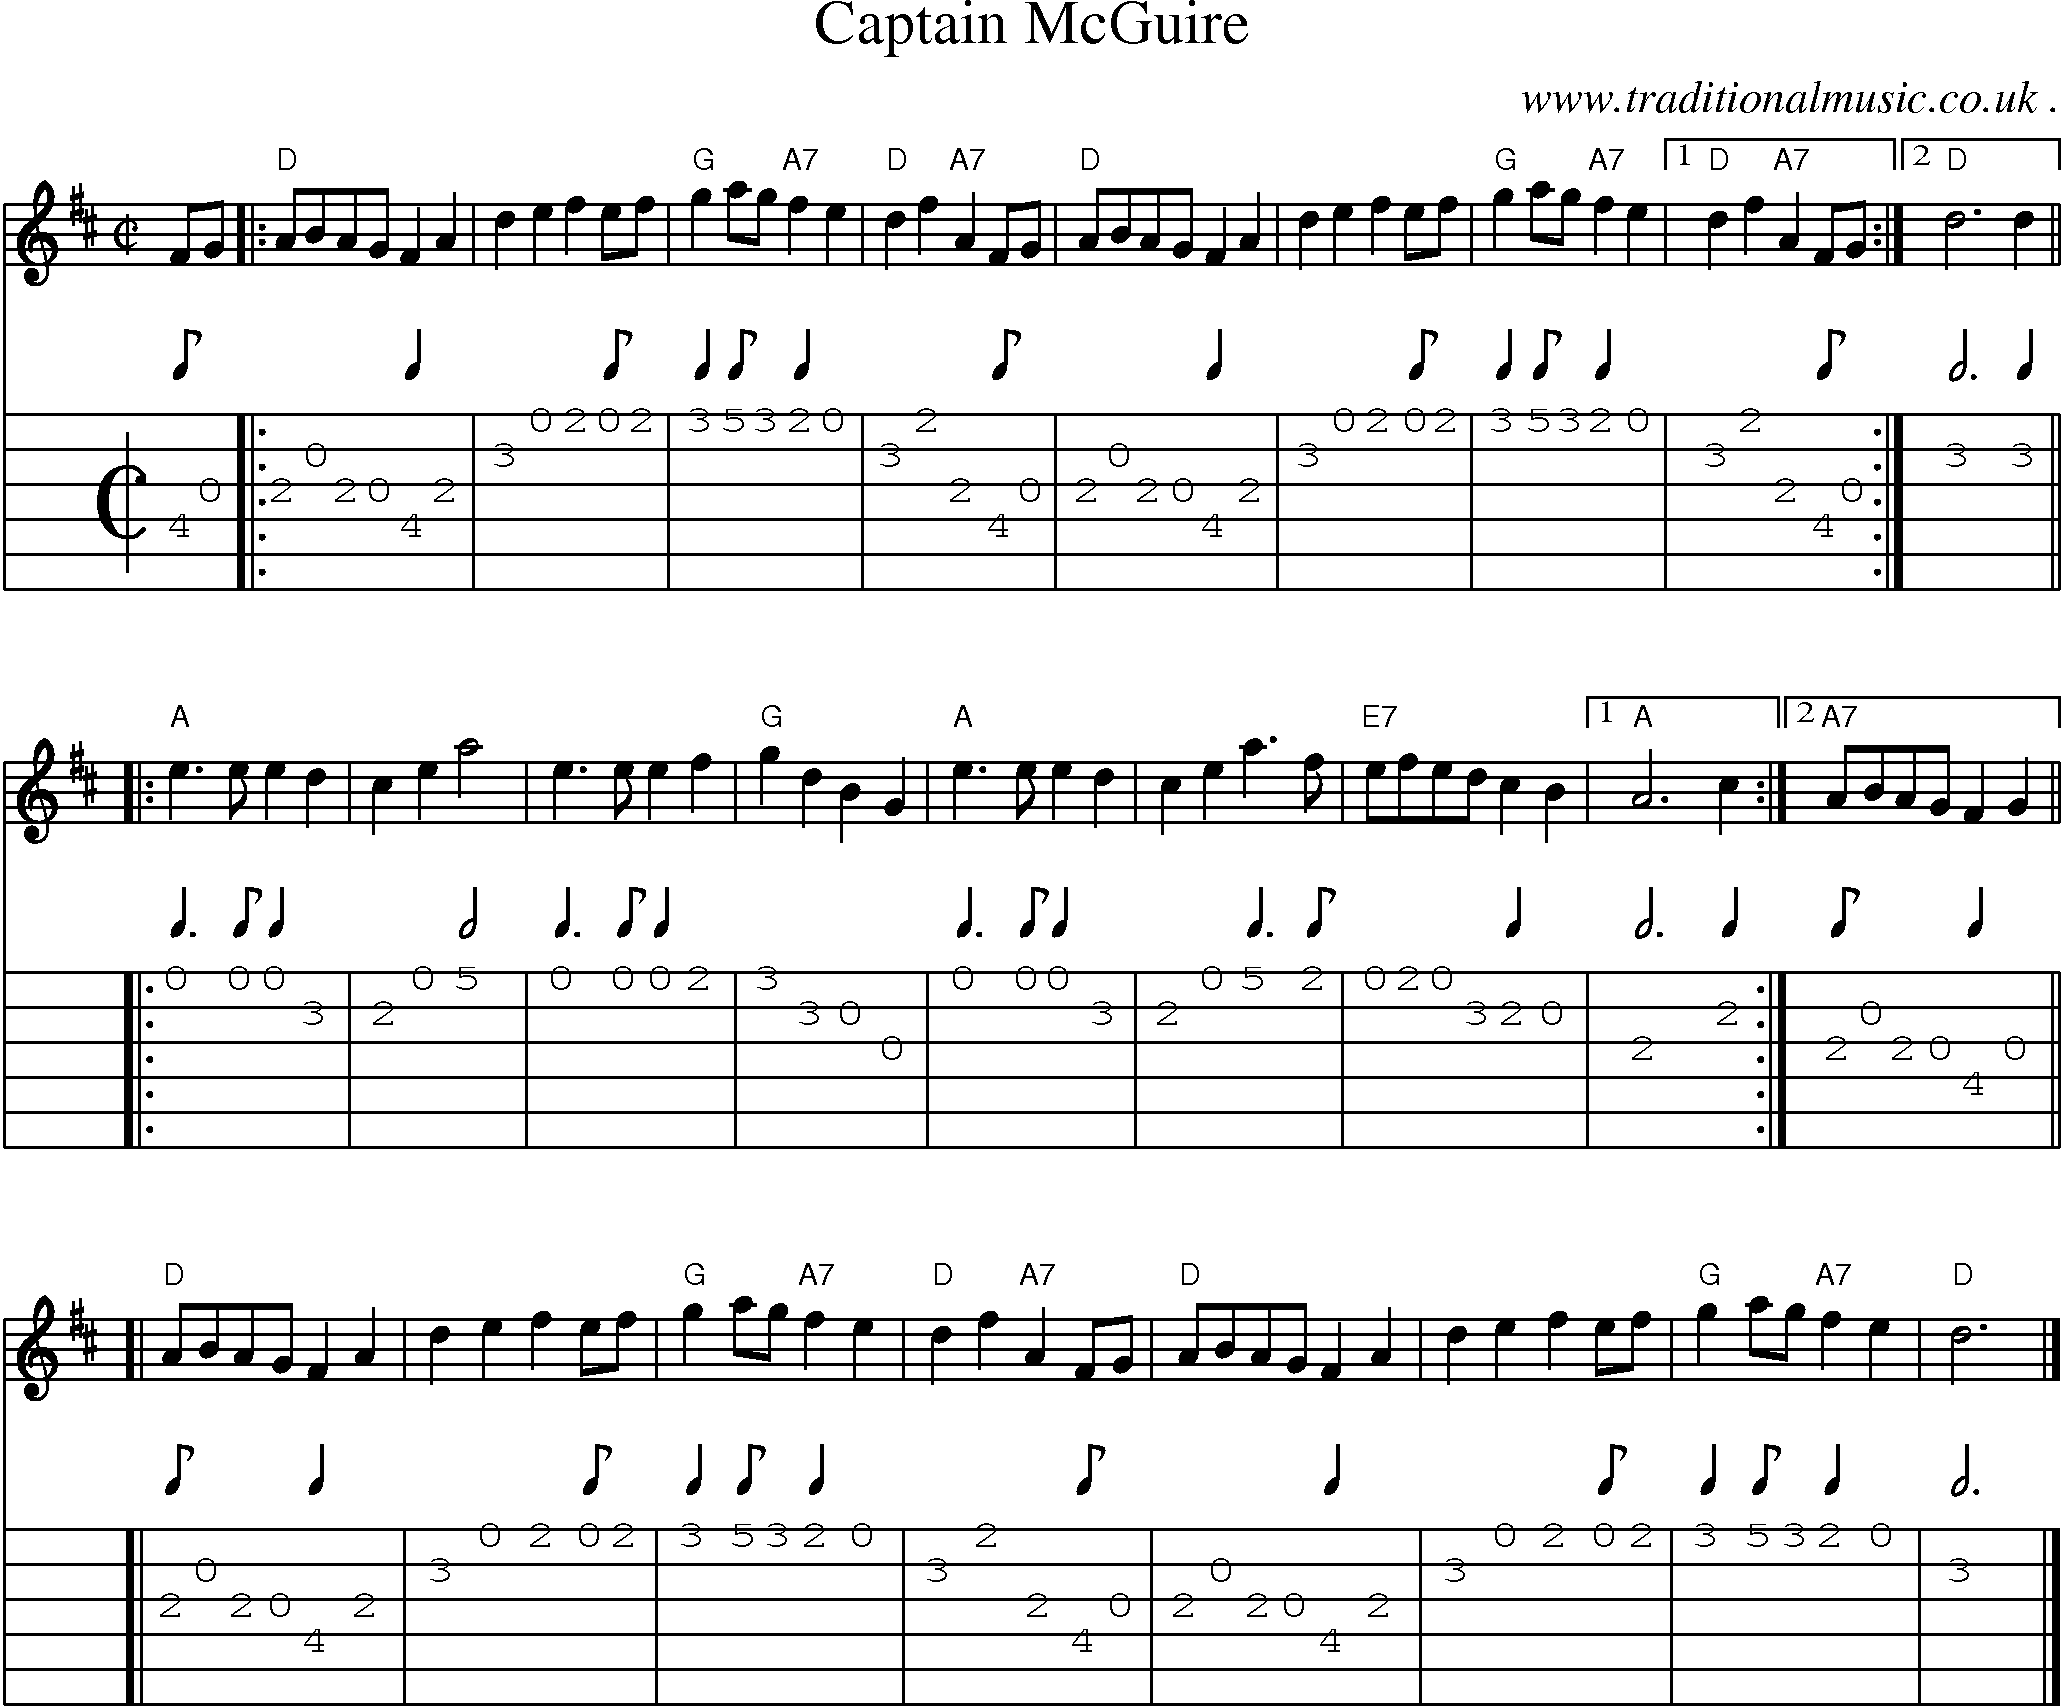 Sheet-music  score, Chords and Guitar Tabs for Captain Mcguire